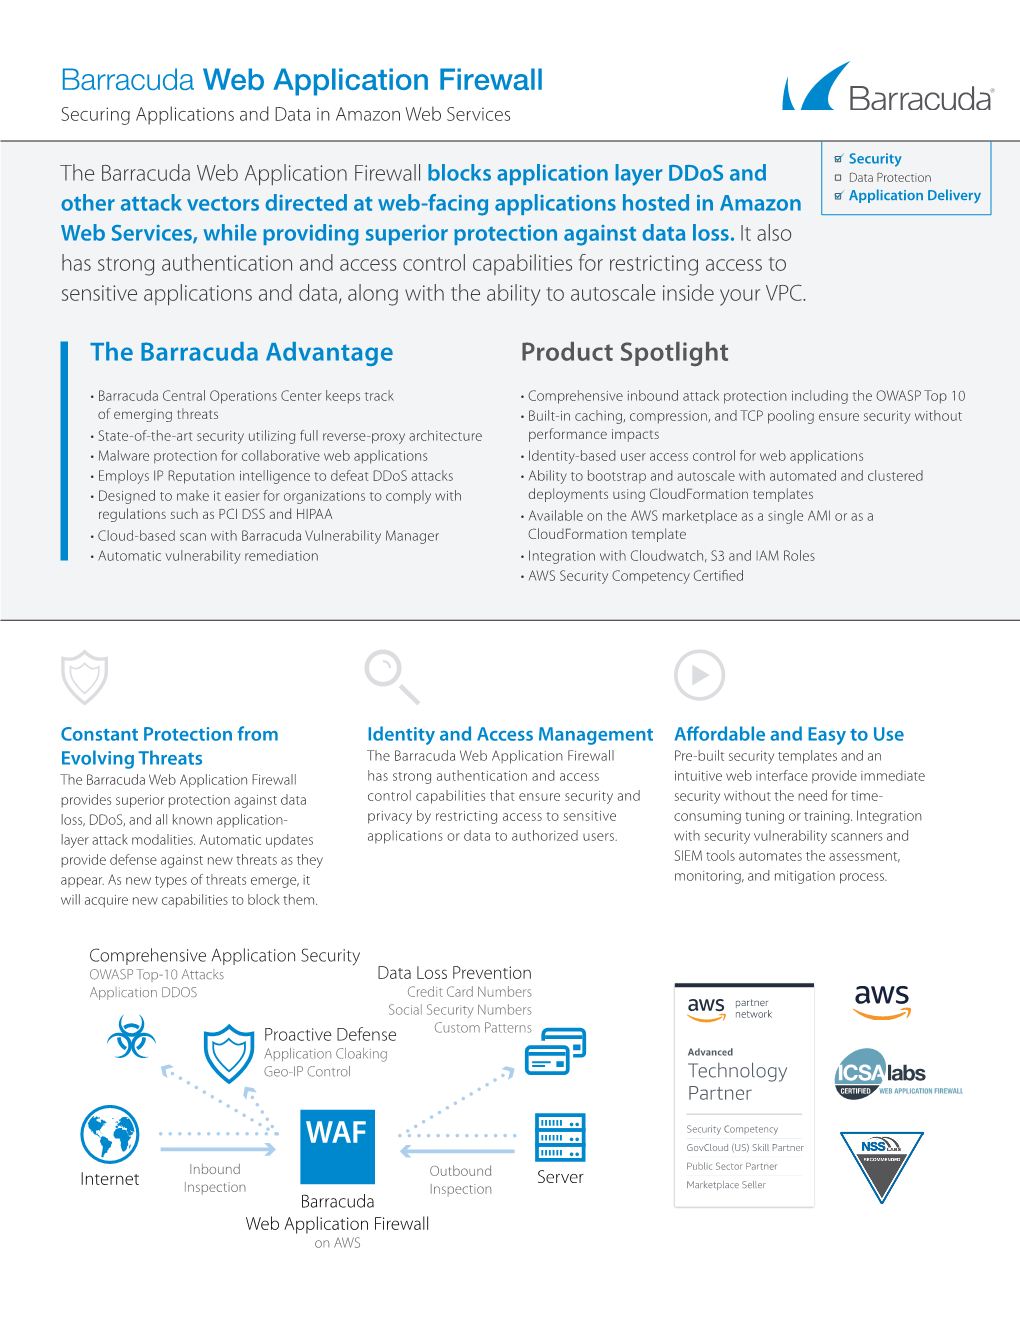 Barracuda Web Application Firewall Securing Applications and Data in Amazon Web Services